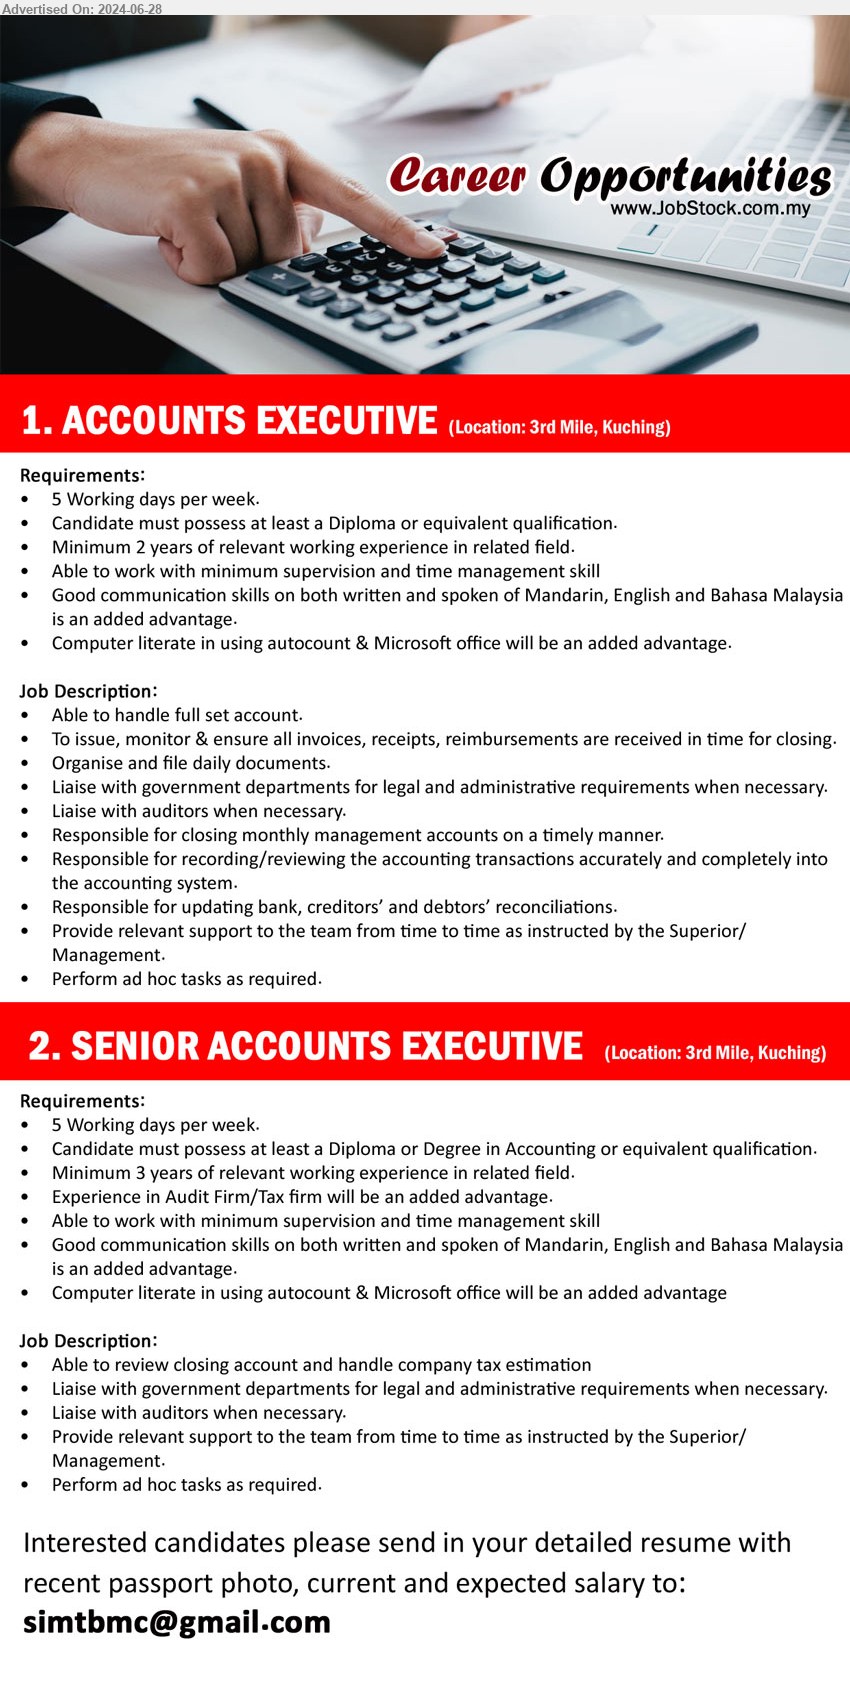 ADVERTISER - 1. ACCOUNTS EXECUTIVE (Kuching), Diploma, Computer literate in using autocount & Microsoft office will be an added advantage.,...
2. SENIOR ACCOUNTS EXECUTIVE (Kuching), Diploma or Degree in Accounting, 3 yrs. exp., experience in Audit Firm/Tax firm will be an added advantage. ,...
Email resume to ...